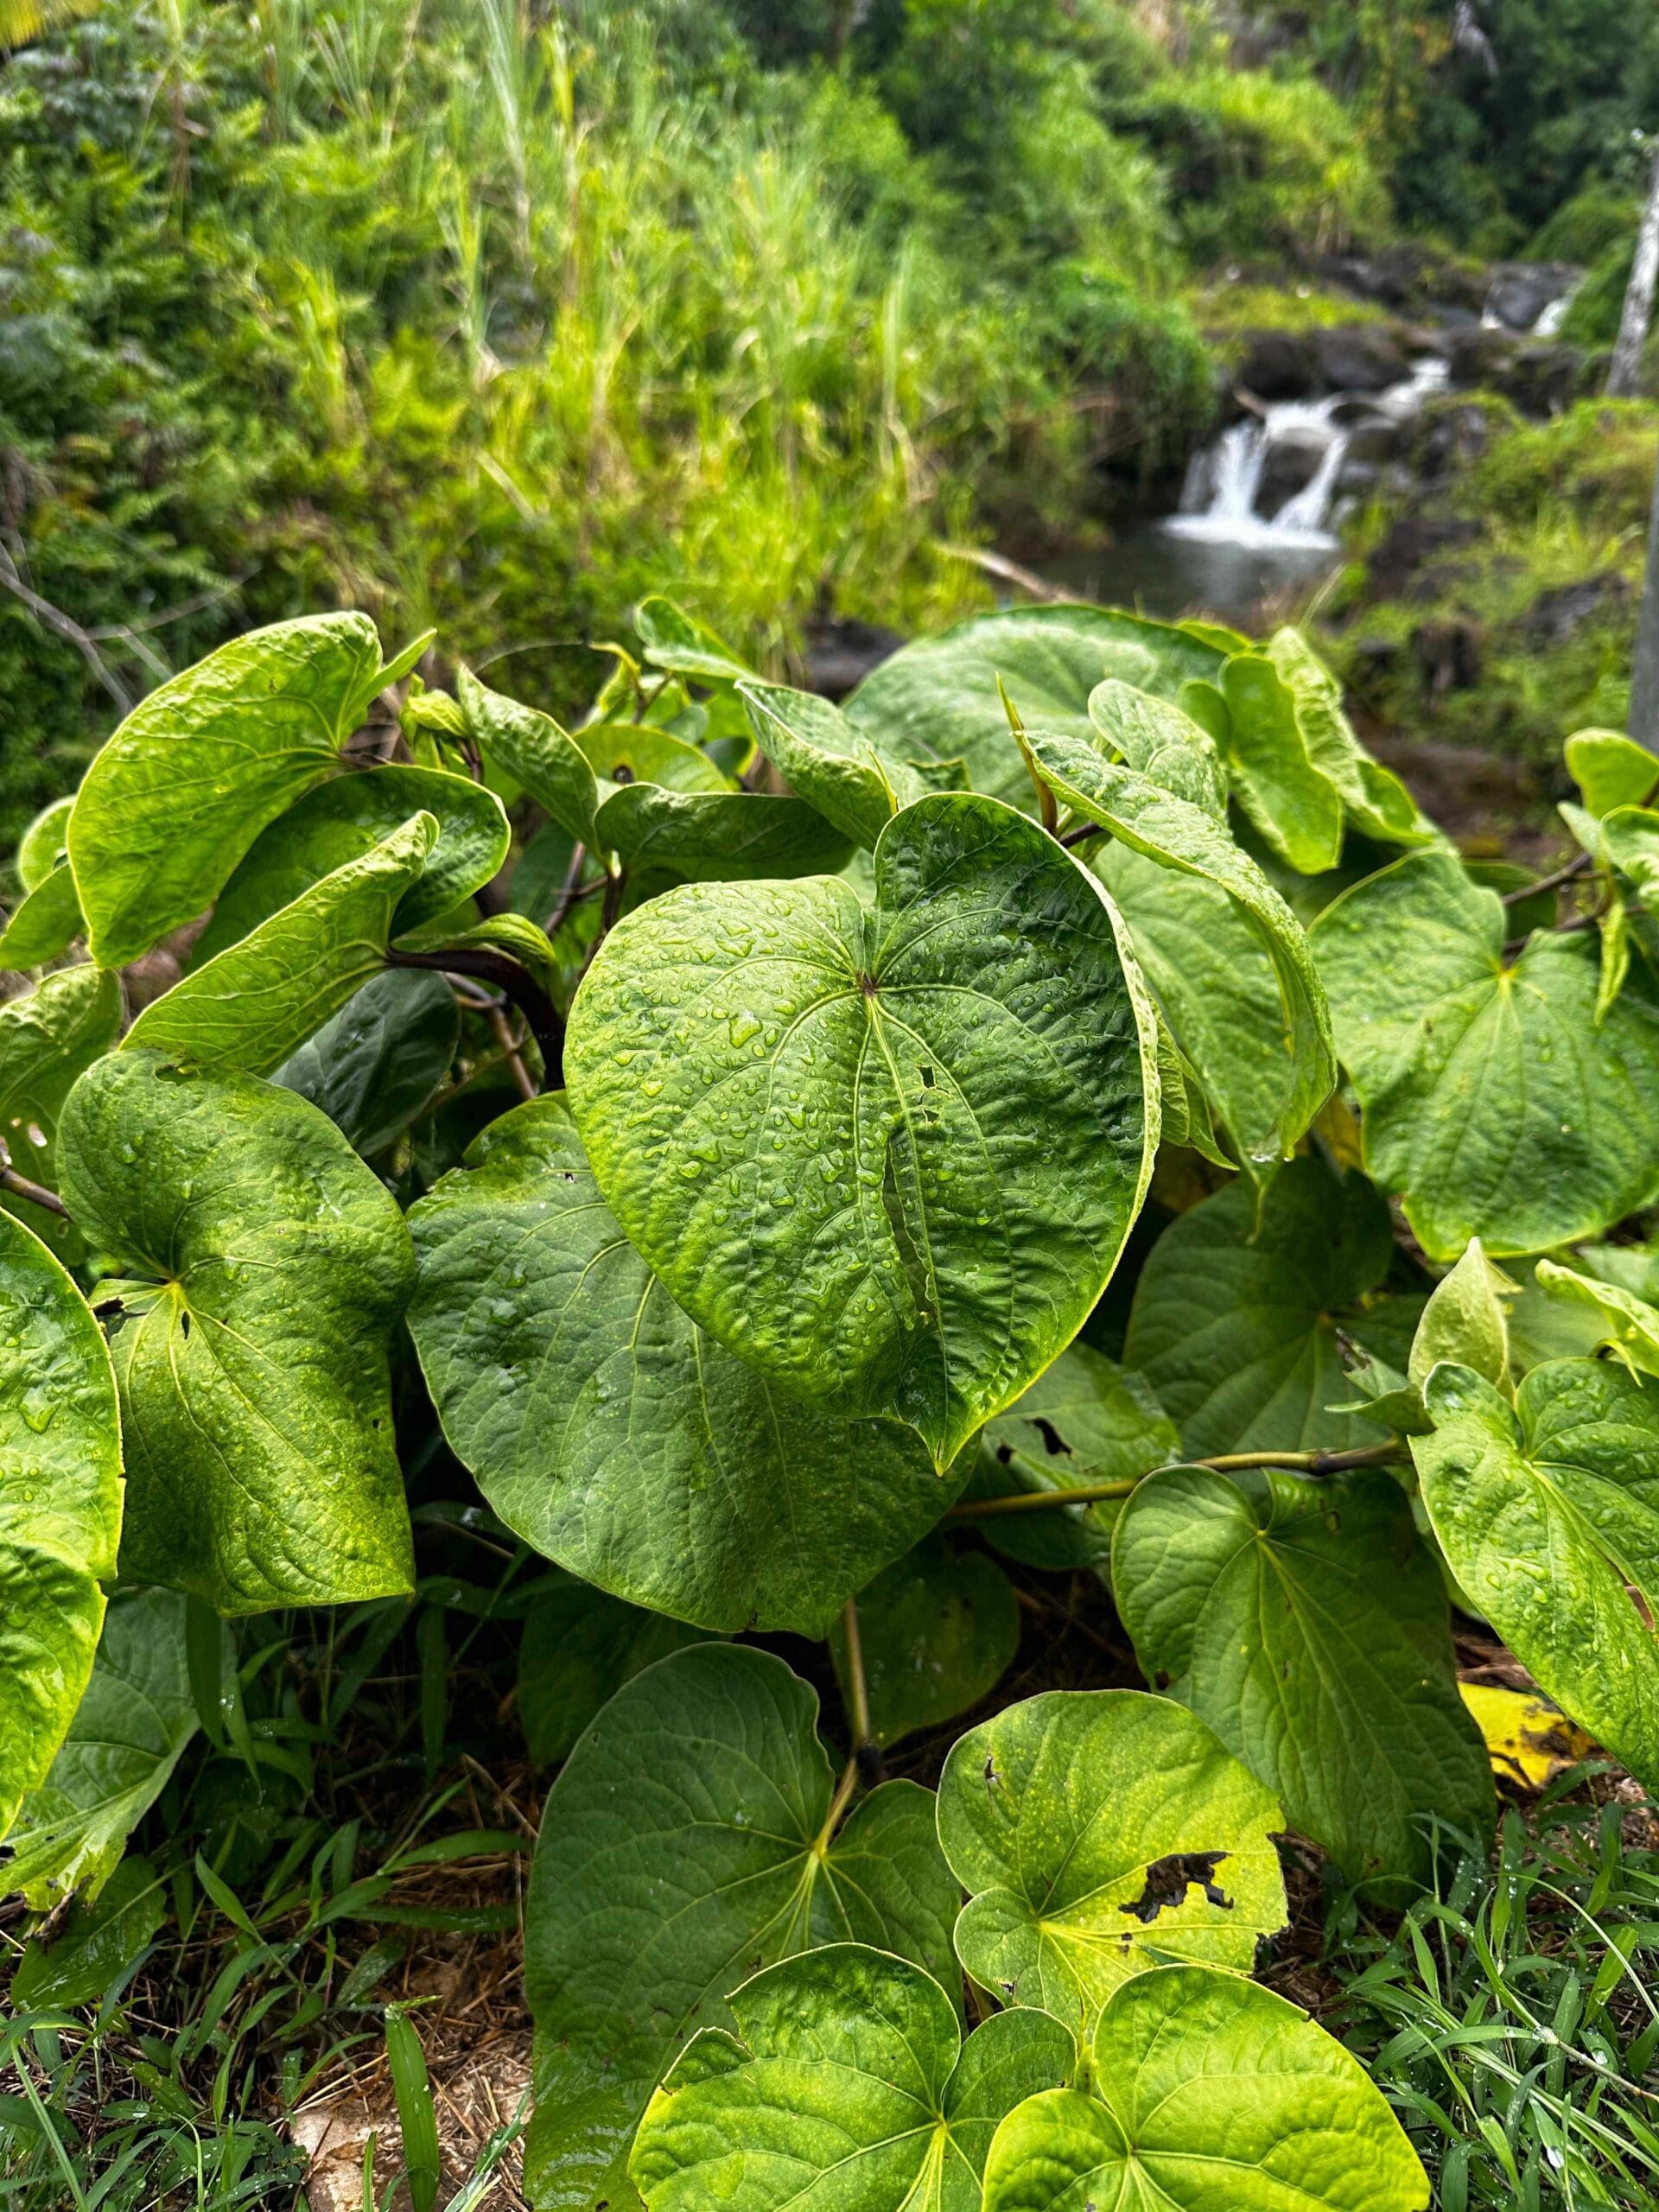 A Photograph taken in the sunny daylight of fresh Hawaiian ahvah ('awa) or kava, with the backdrop of a waterfall.